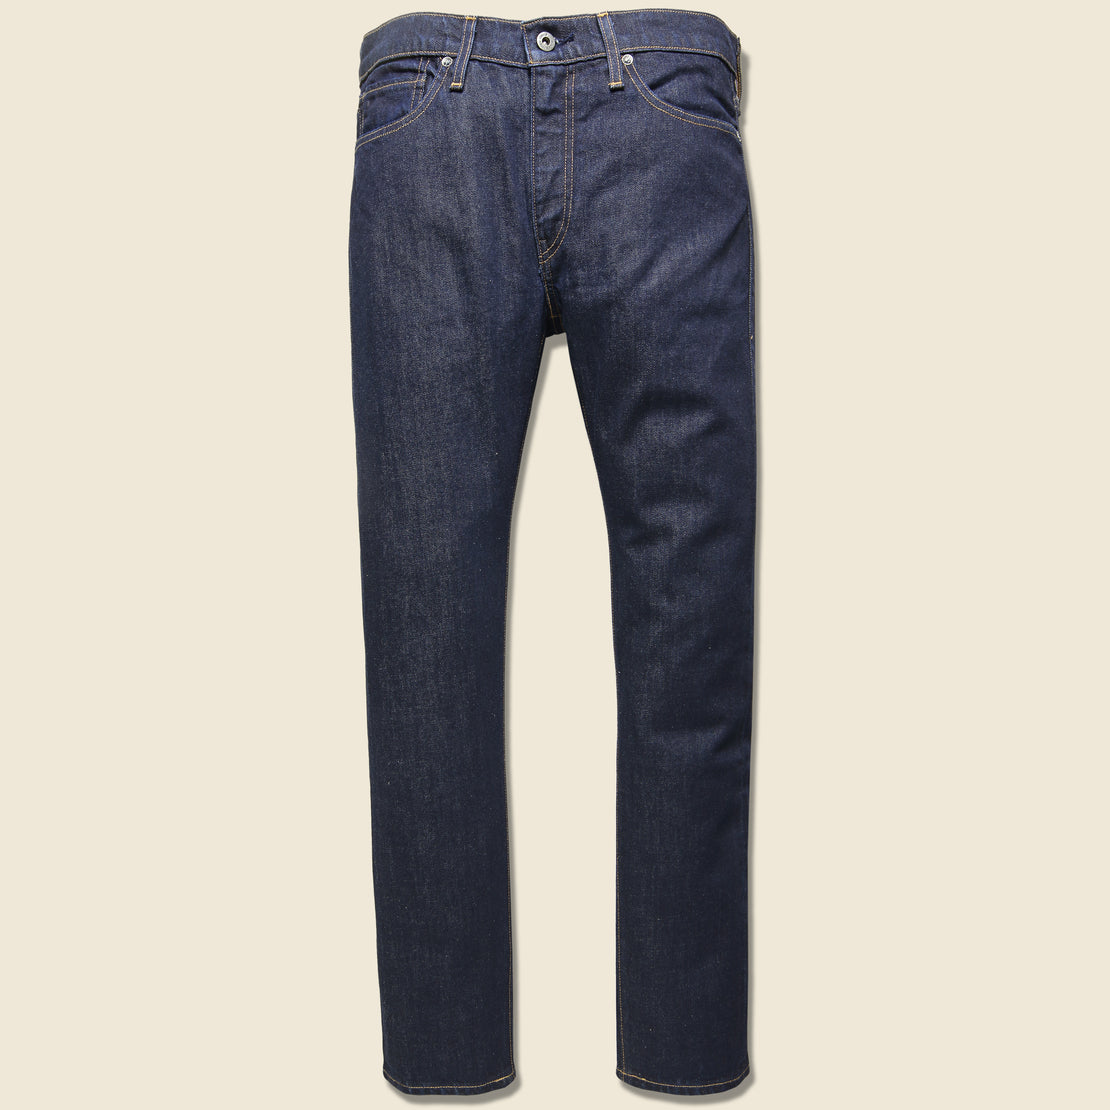 Levis Made & Crafted 510 Skinny Jean - Resin Rinse Stretch